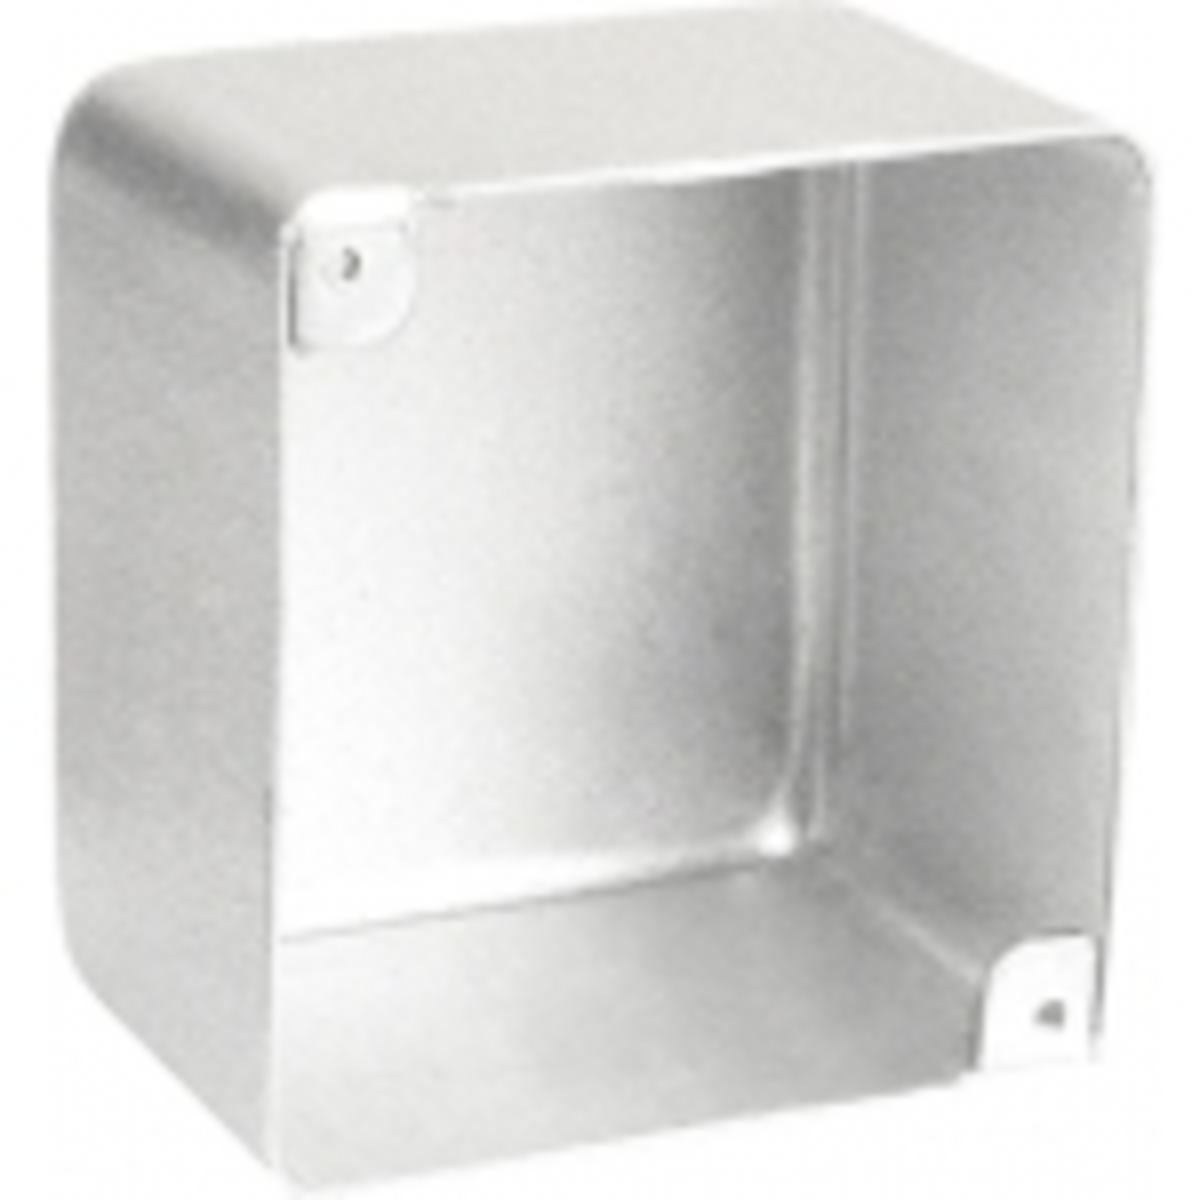 4" Square Box, 2-1/8" Deep - Drawn, No Knockouts - Stainless Steel